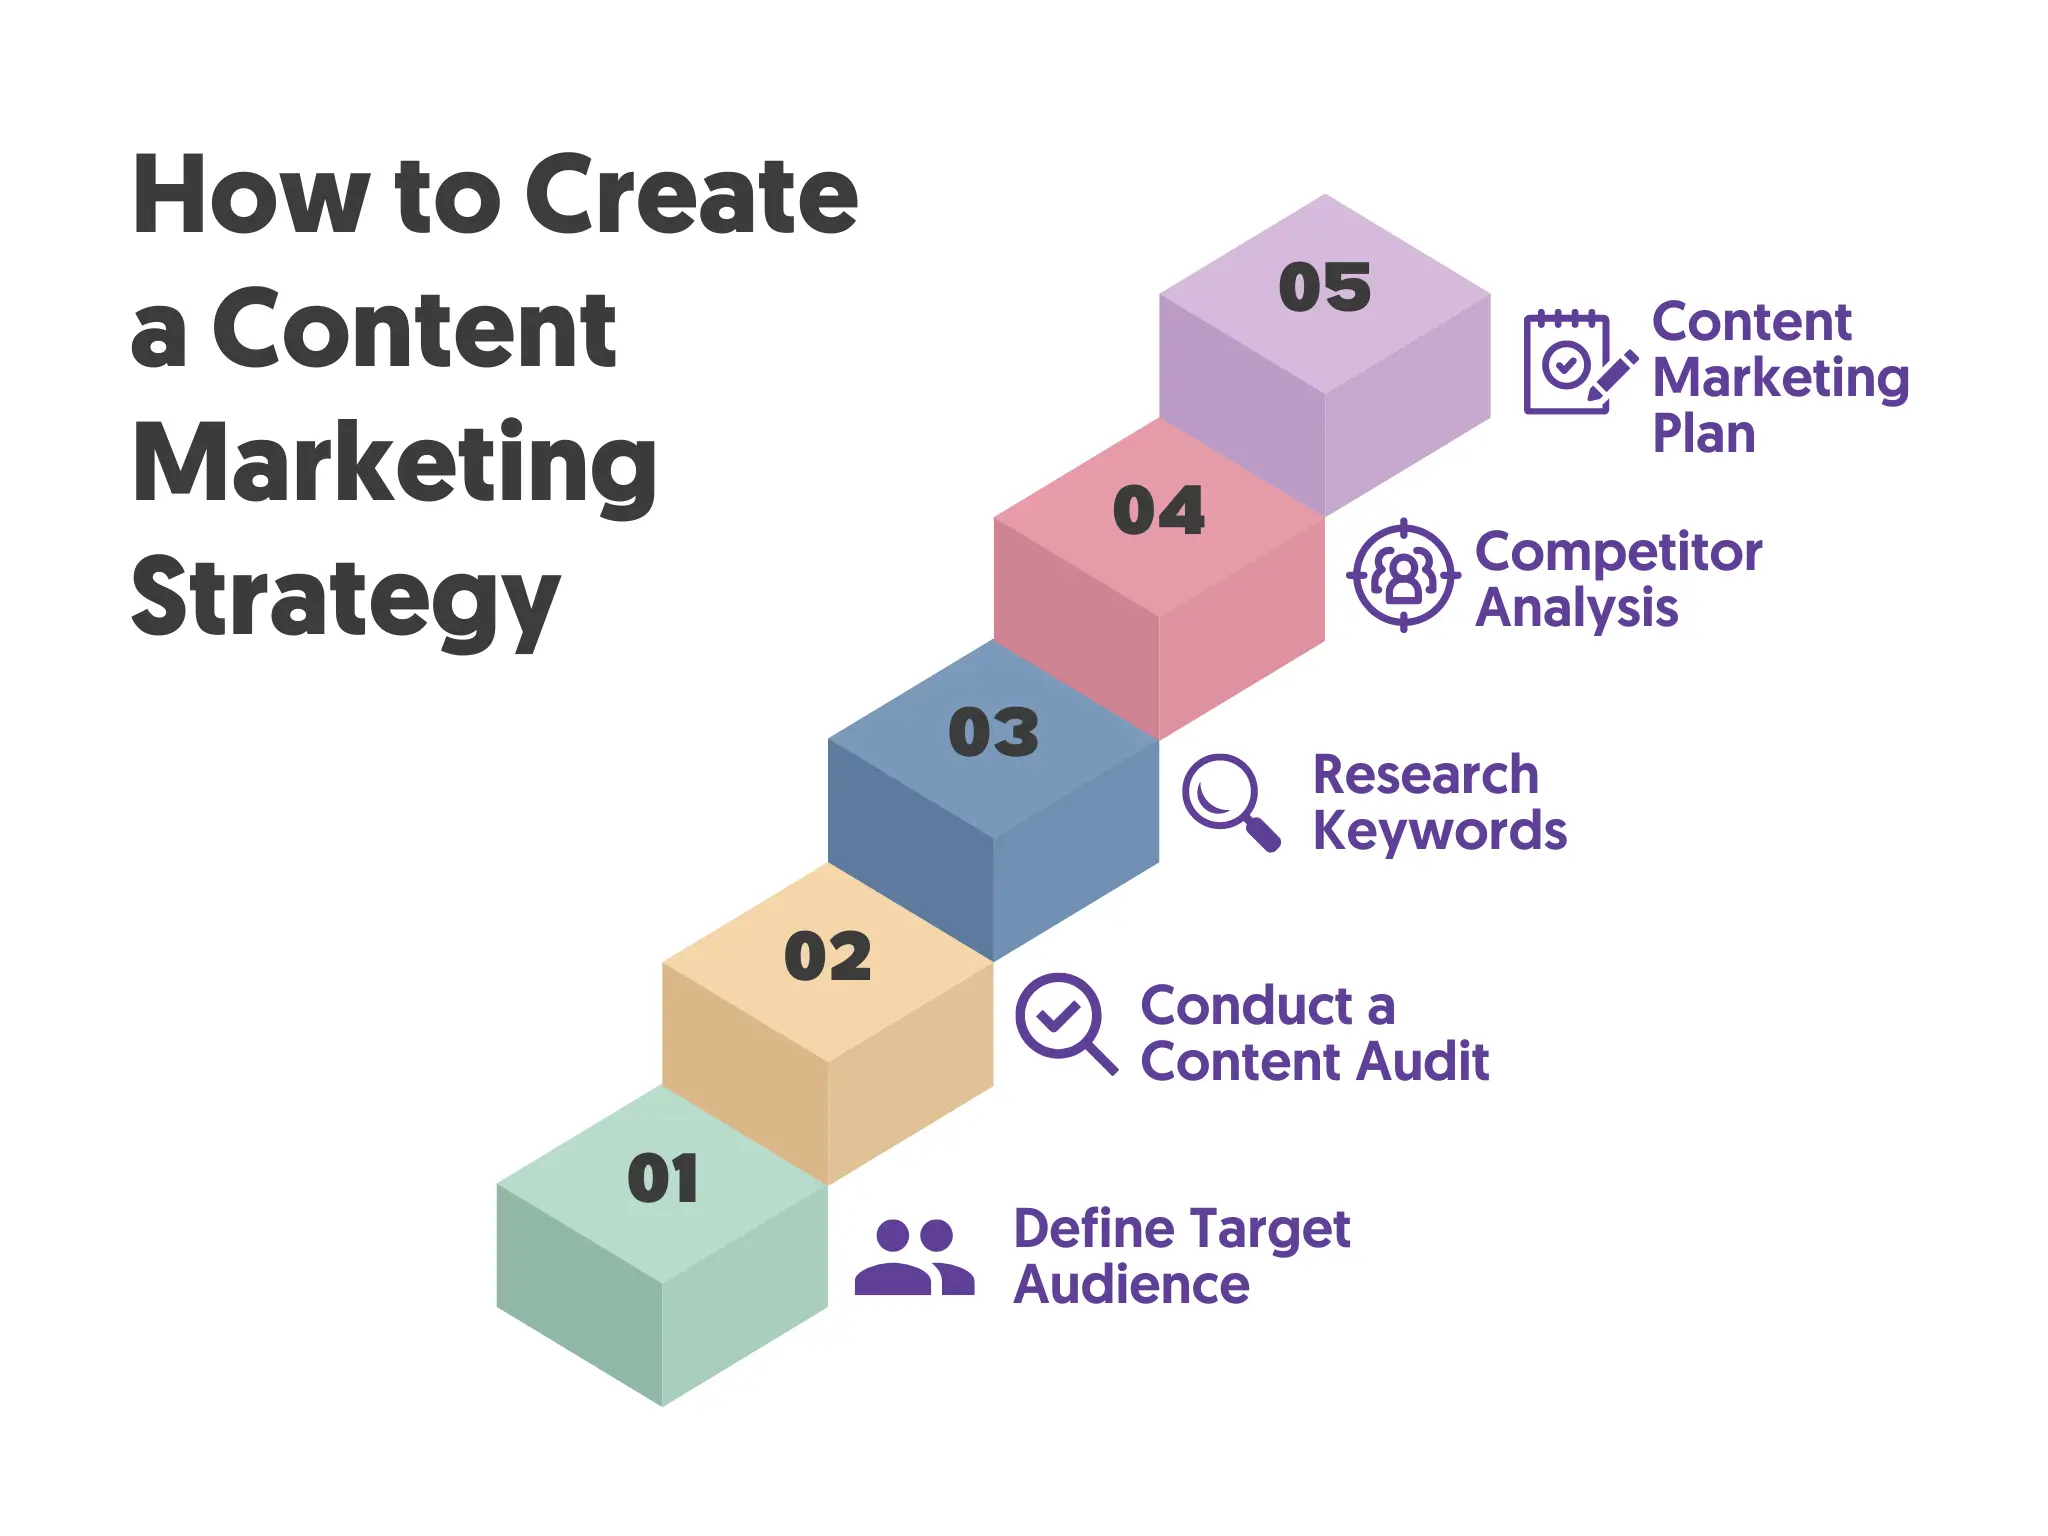 Steps to Create a Content Marketing Strategy